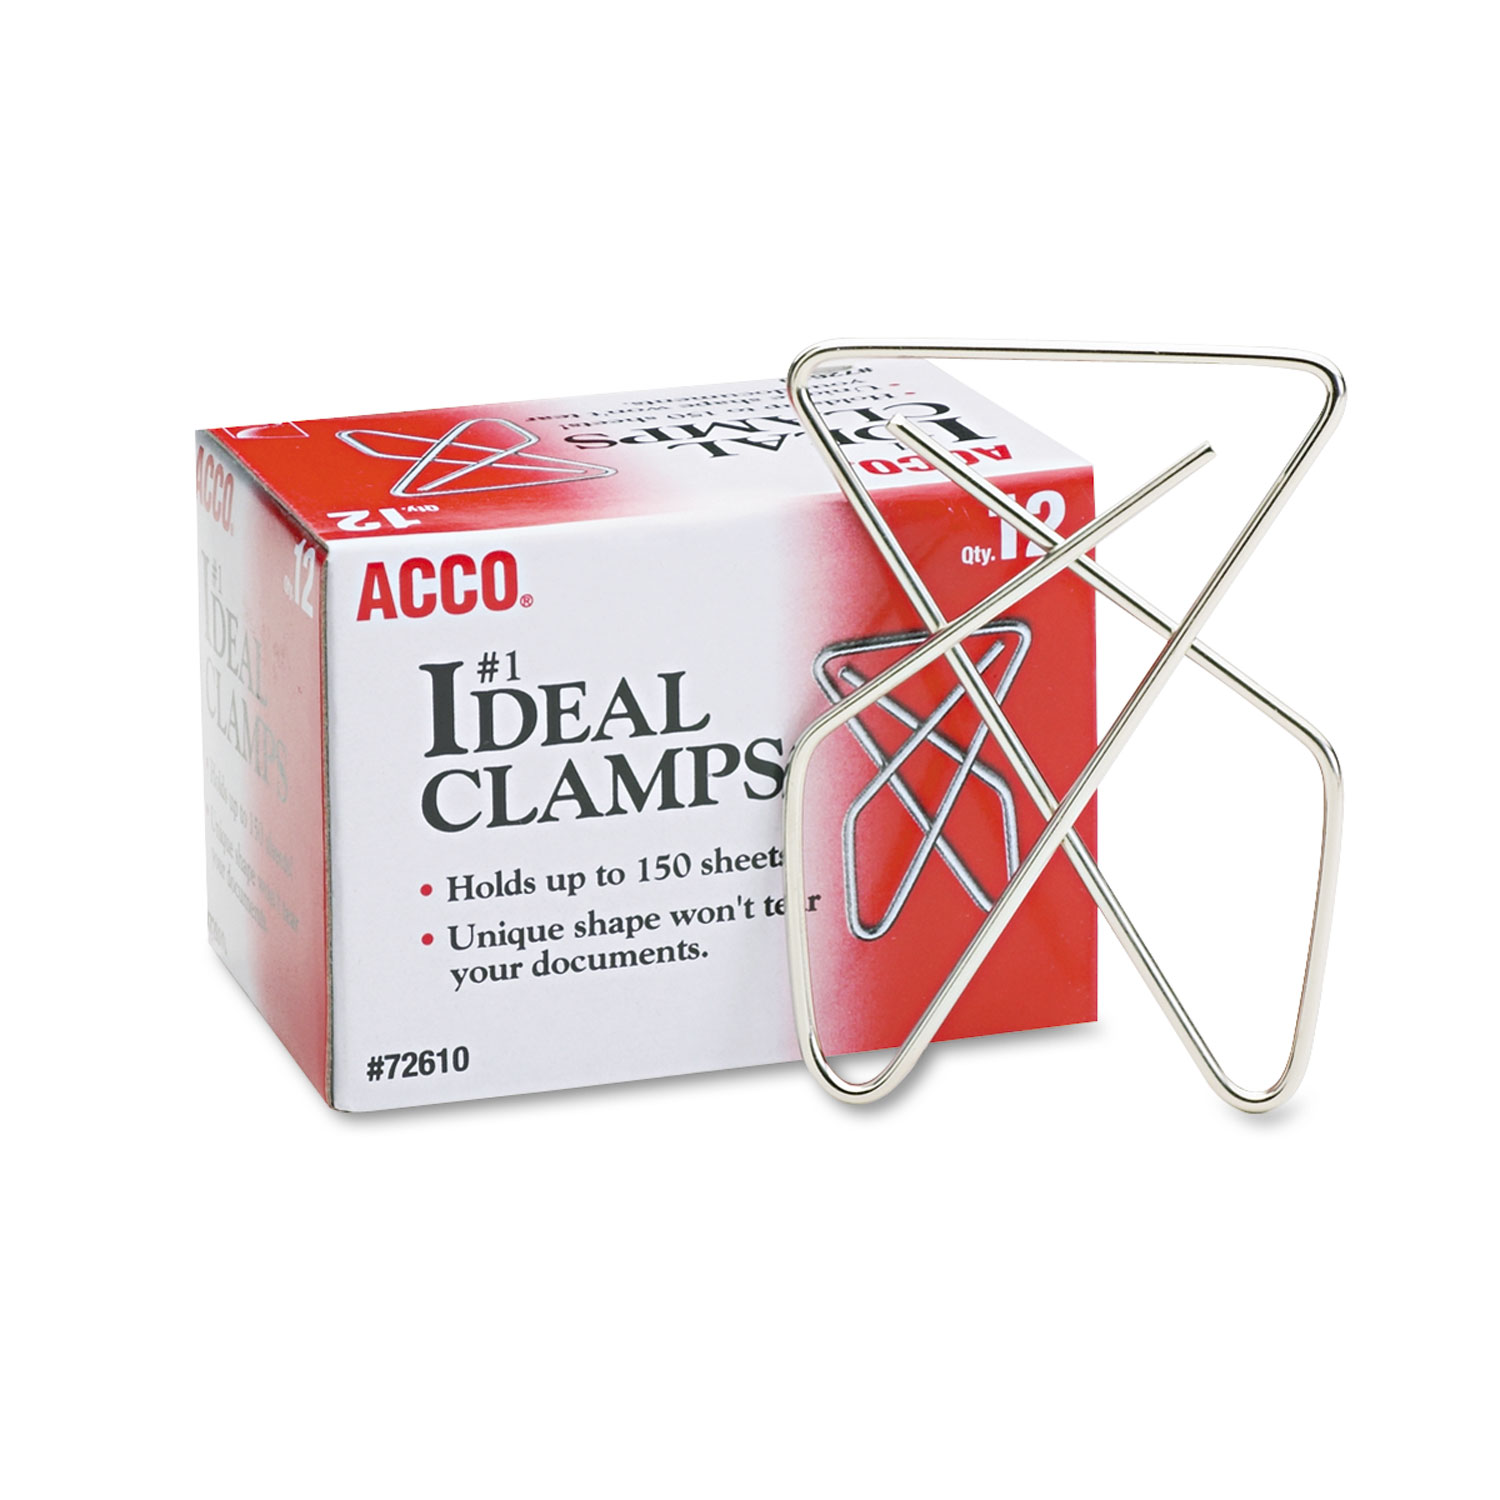  ACCO A7072610B Ideal Clamps, Large (No. 1), Silver, 12/Box (ACC72610) 